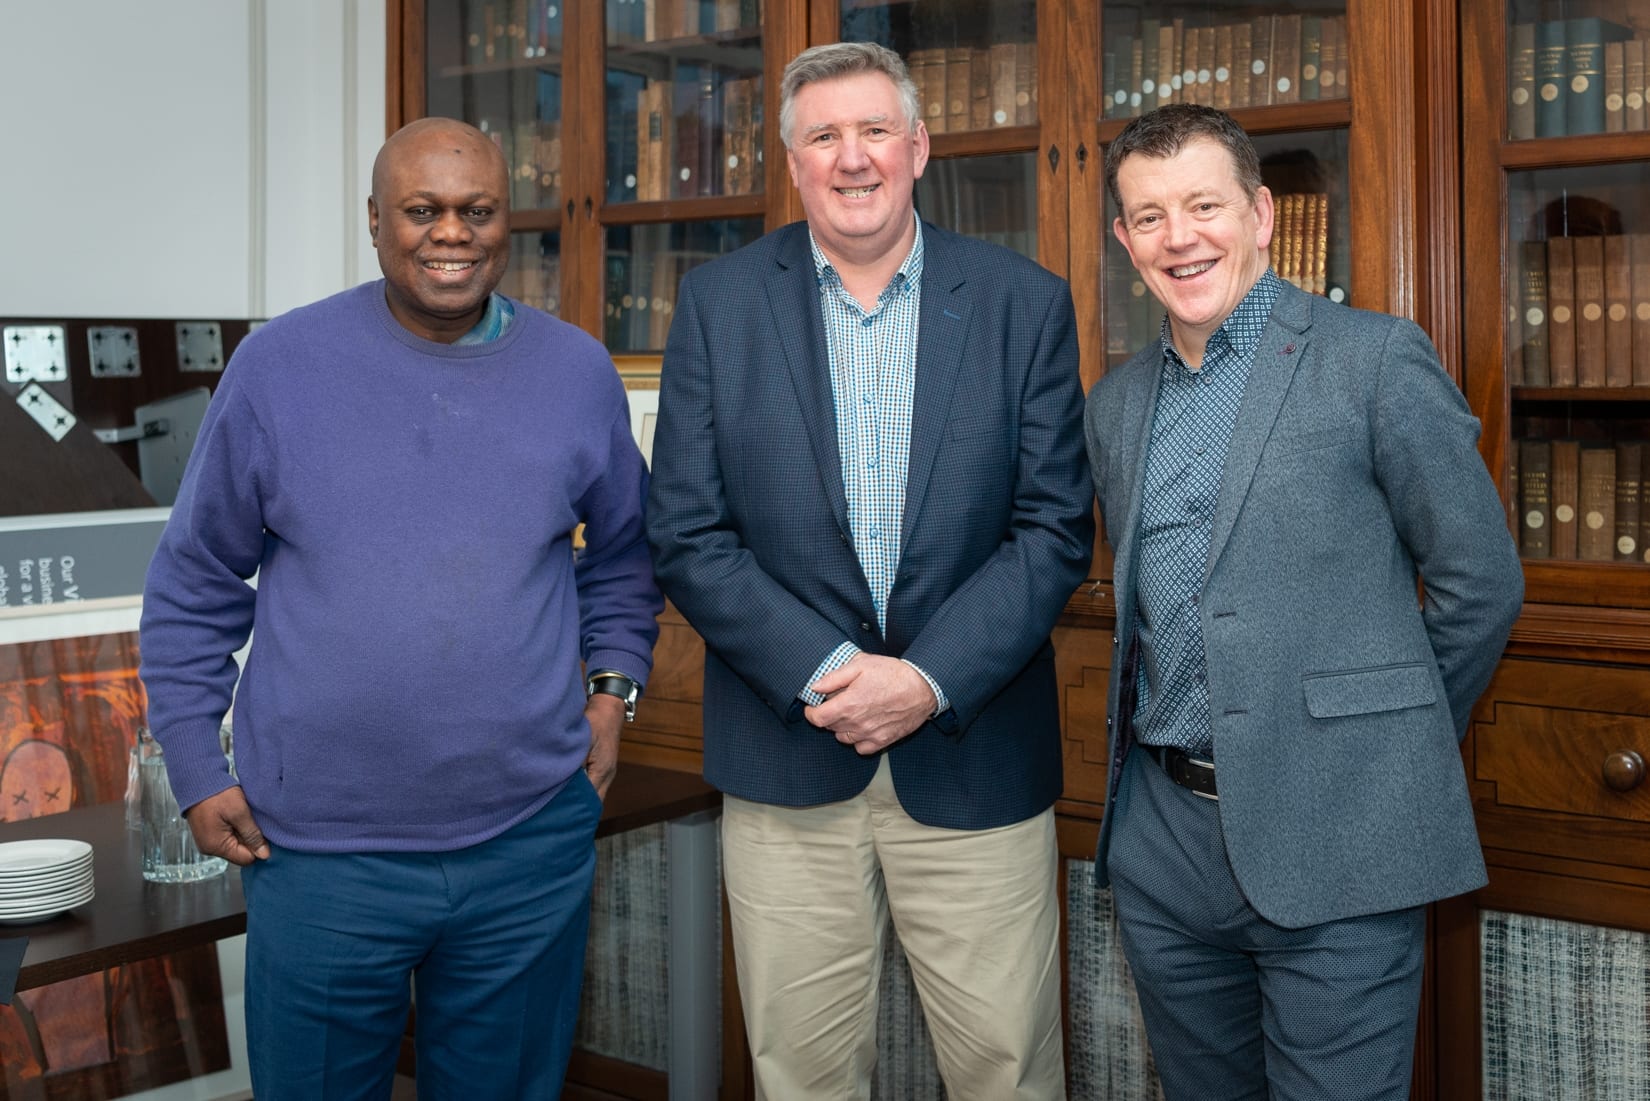 No repro fee-Limerick Chamber AGM 2020 which was held in Limerick Chamber Boardroom on Thursday 27th February - From Left to Right: Maurice Kikangala - Shamrock Consulting Services, Dermot Graham - Limerick Chamber, Graham Burns - Limerick Chamber Board Member / CPL 
Photo credit Shauna Kennedy